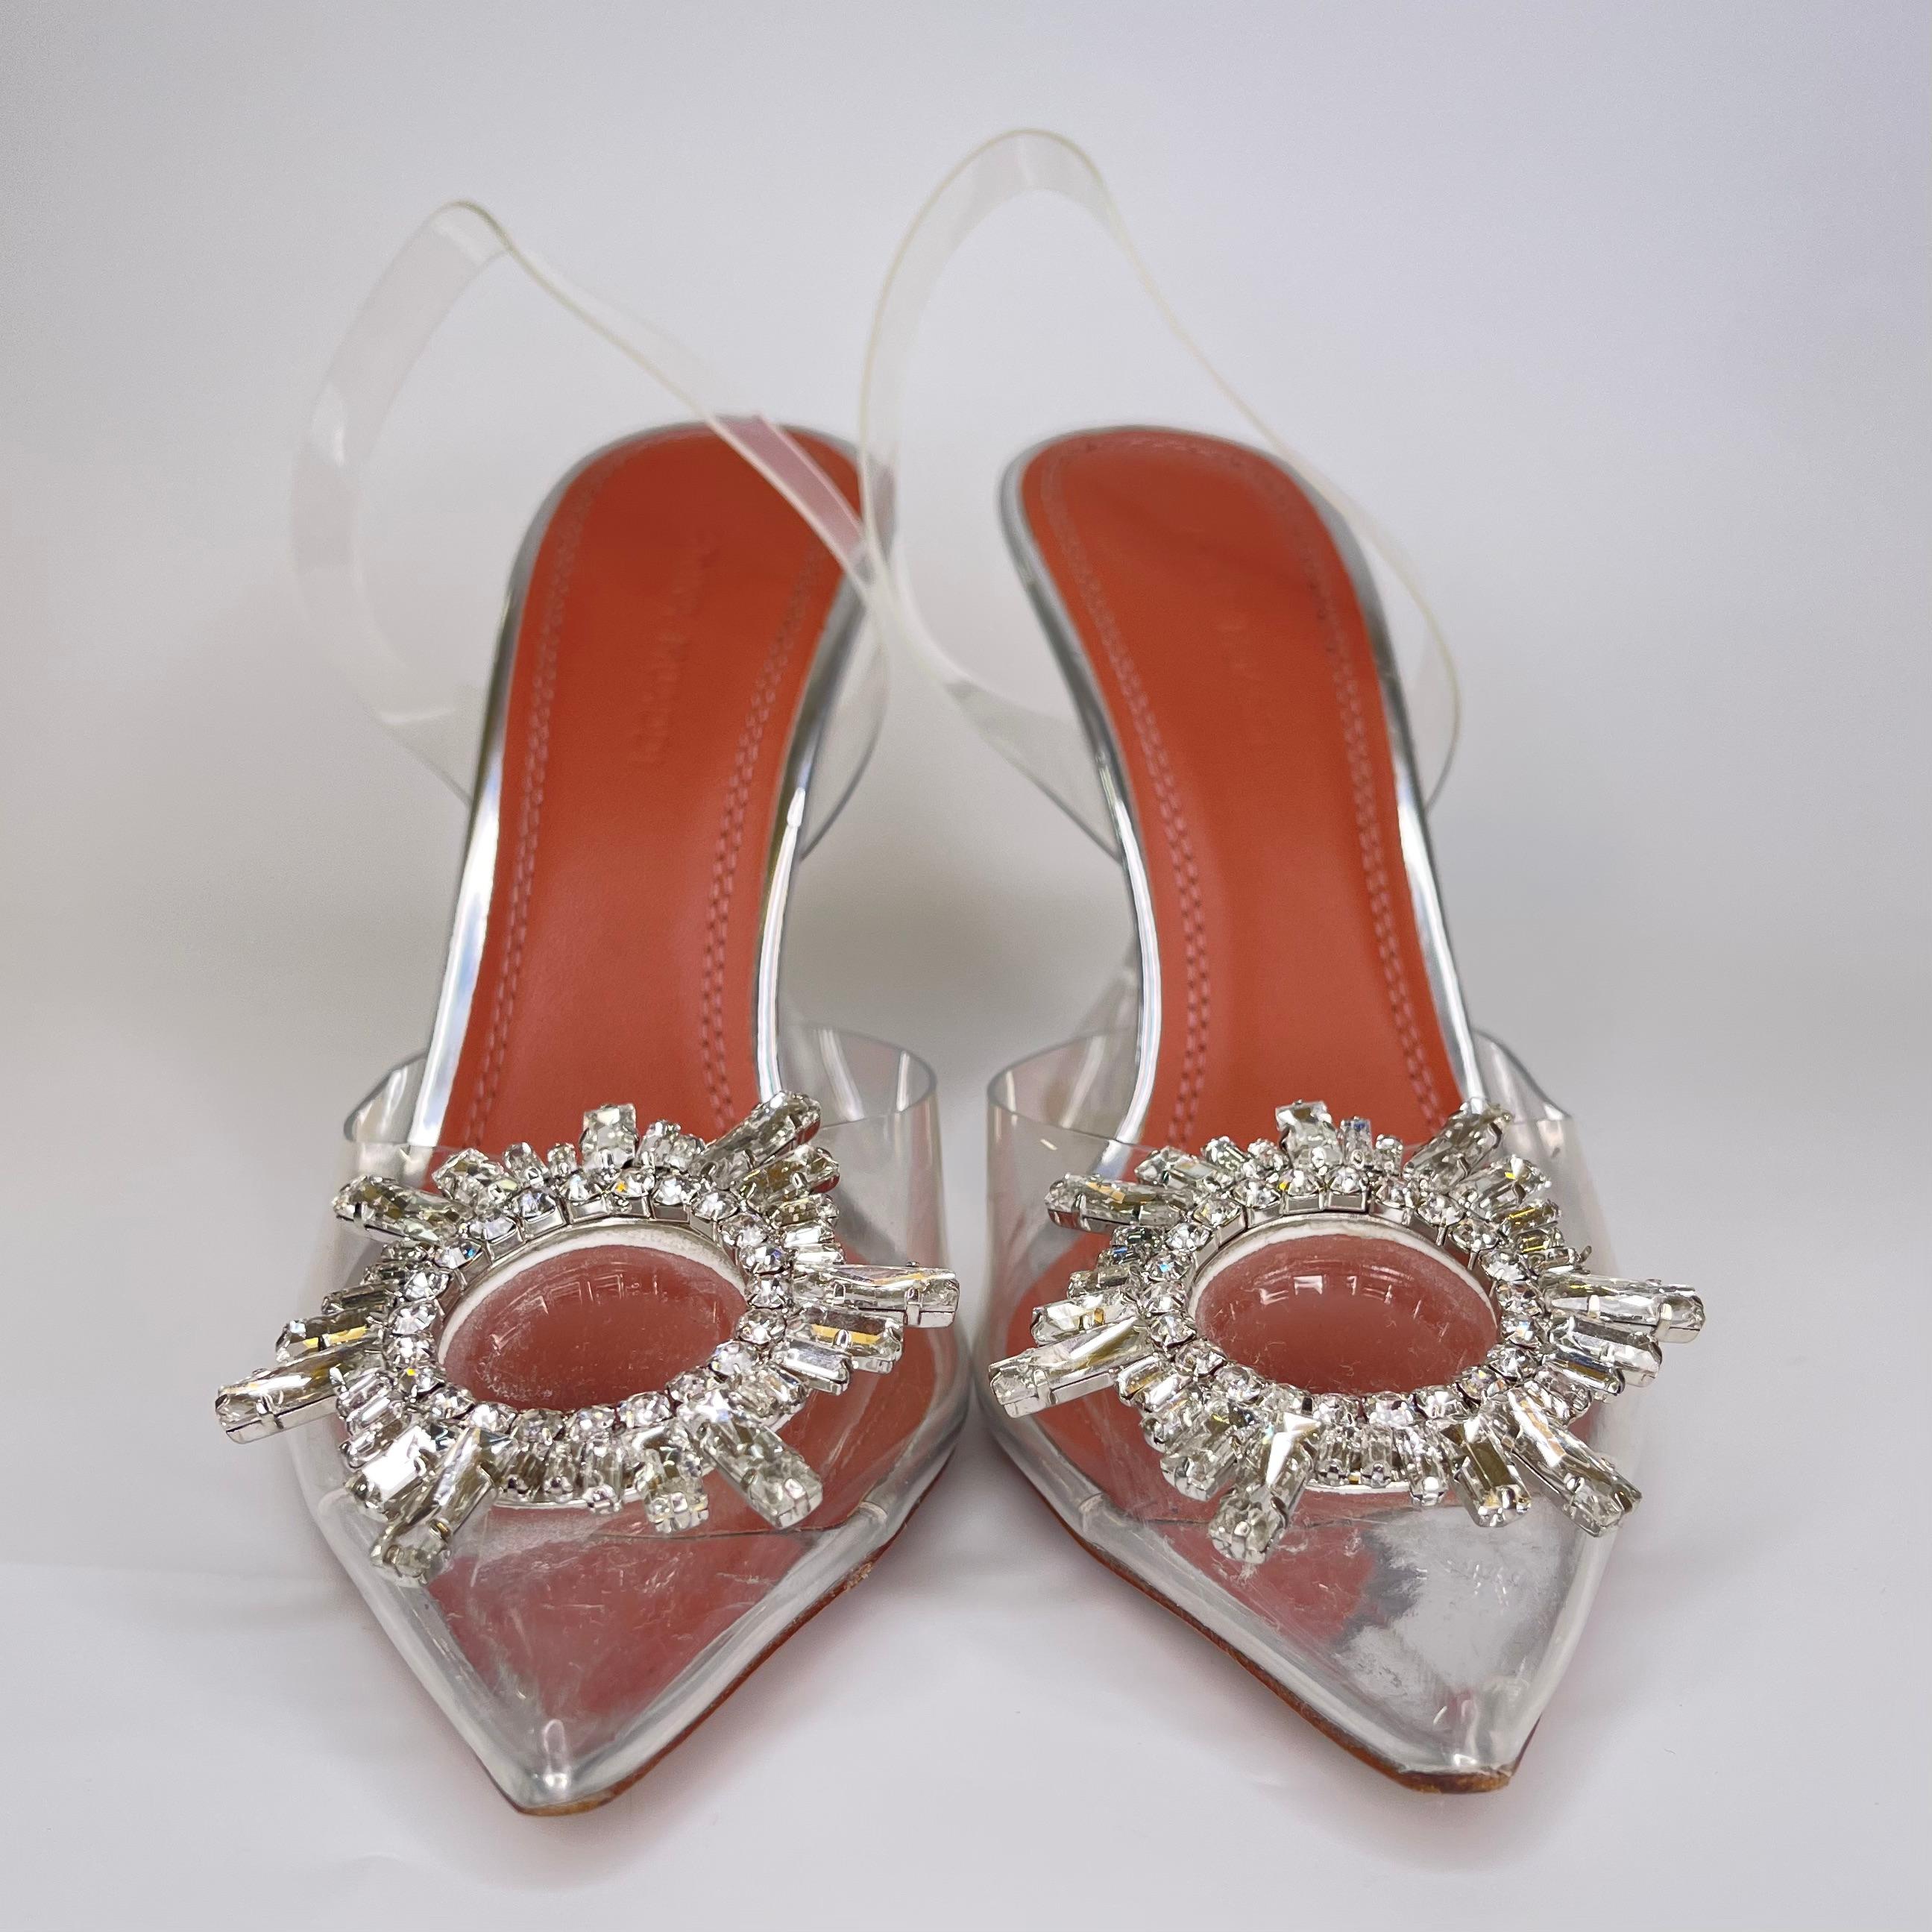 These transparent slingback pumps are the orginal heels by Amina Muaddi. Made from PVC, they feature pointed toes with silver tone and crystal embellishment. This style is set on 95 mm flared stiletto heels.

COLOR: Clear
MATERIAL: PVC
SIZE: 36 EU /